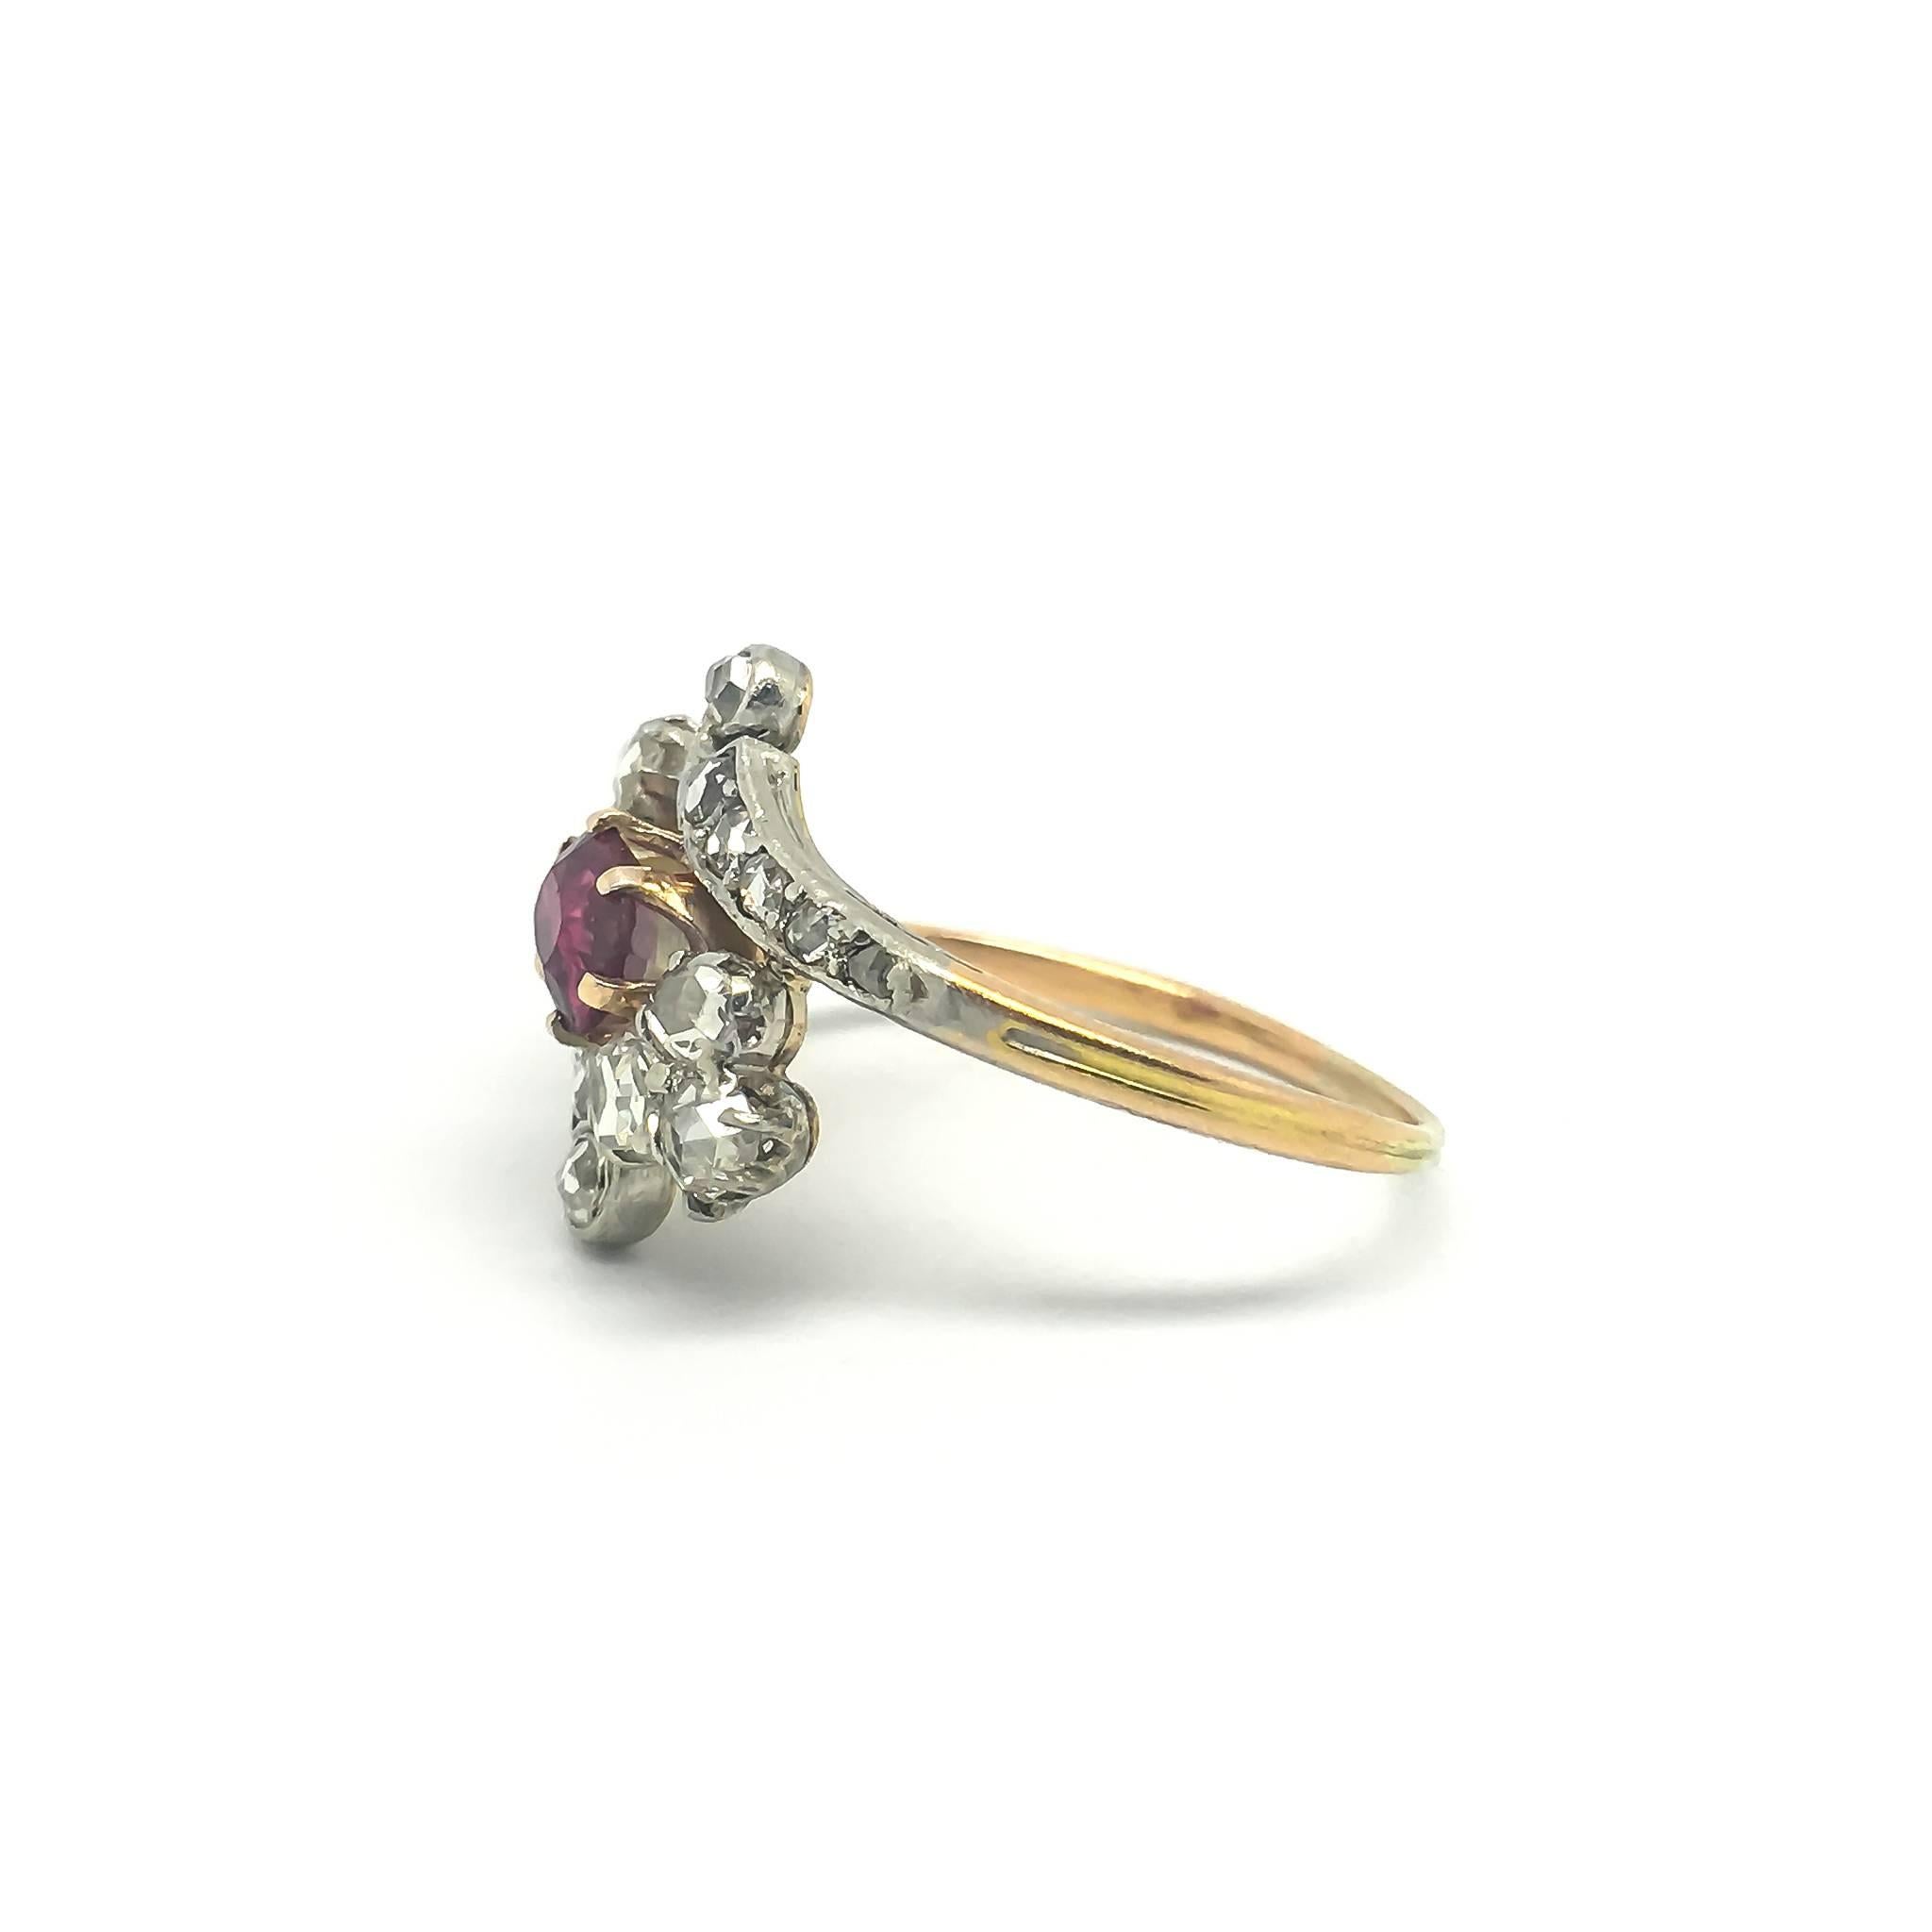 A stunning Edwardian Ruby and Diamond dress ring. 

The central ruby is flanked by two clusters of rose cut diamonds which are set between diamond studded scroll shoulders. 

UK size P 1/2
US size 7 3/4

Crafted from 18ct gold. 